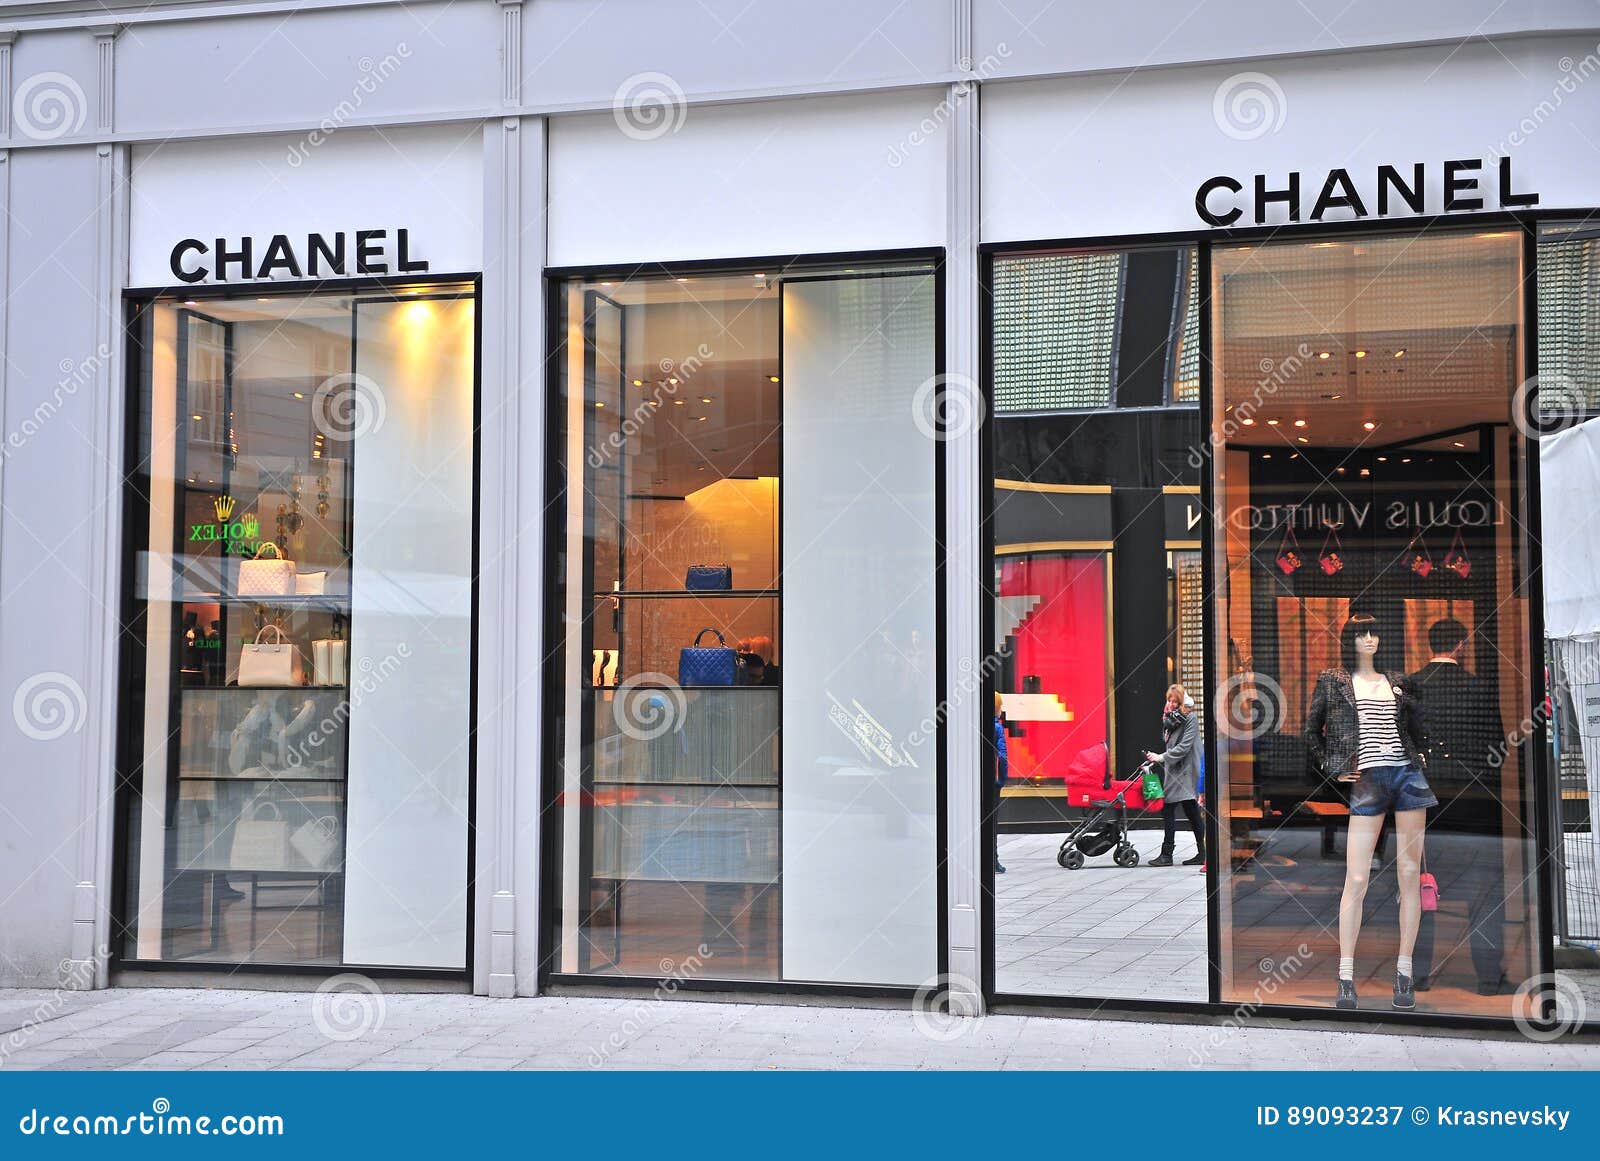 chanel products near me